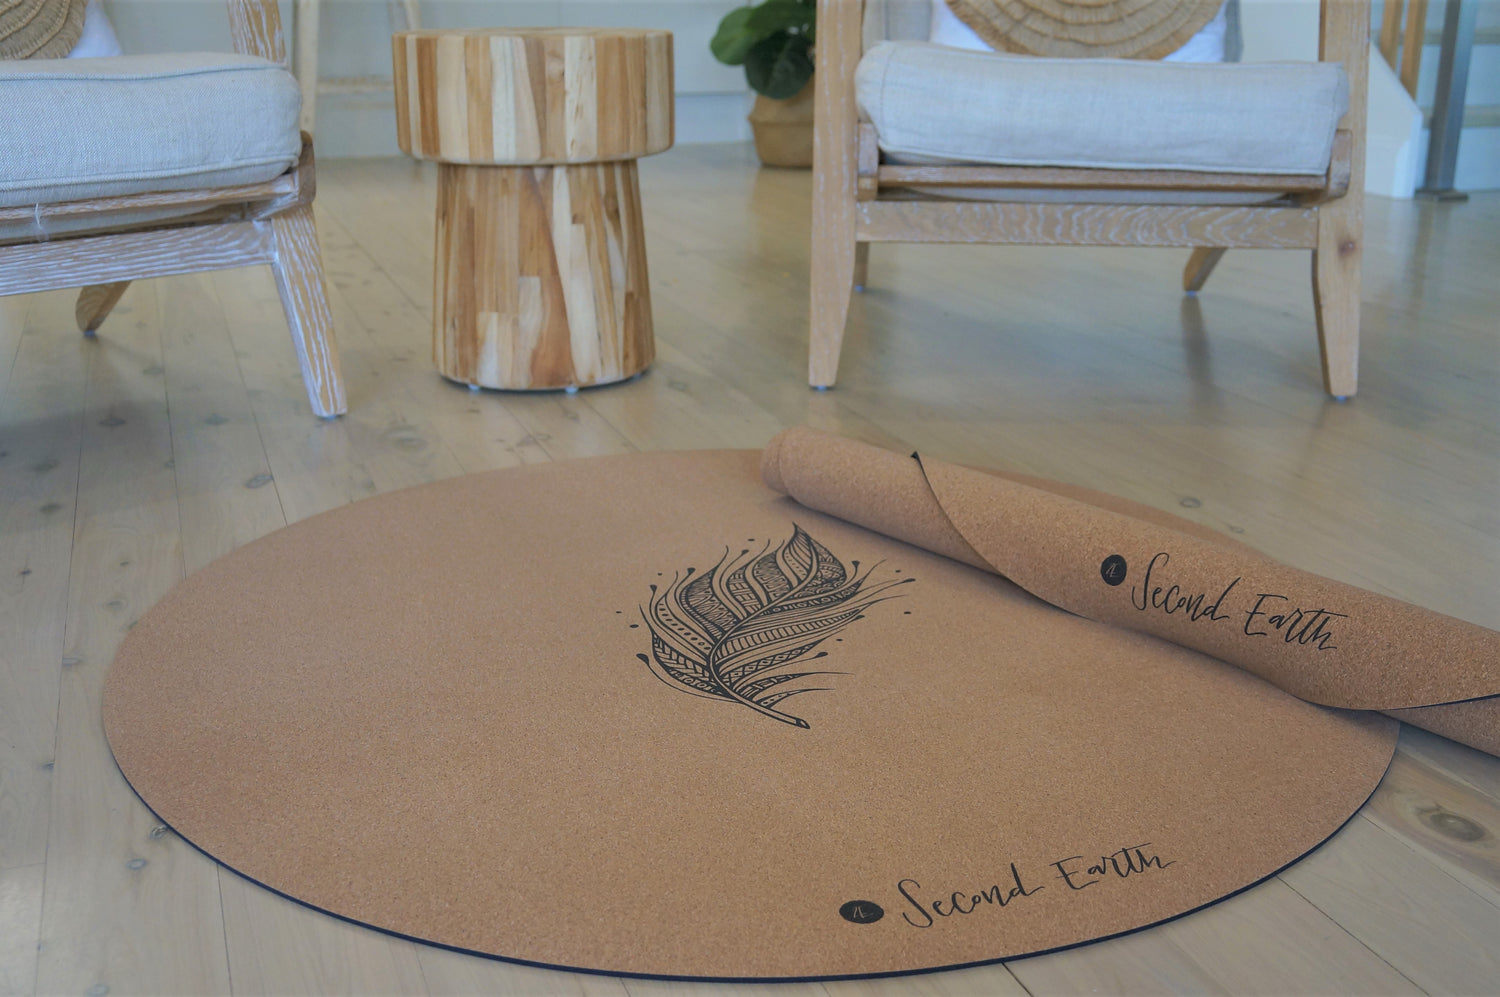 Non toxic play mat - Second Earth 2E Play - Natural and sustainable